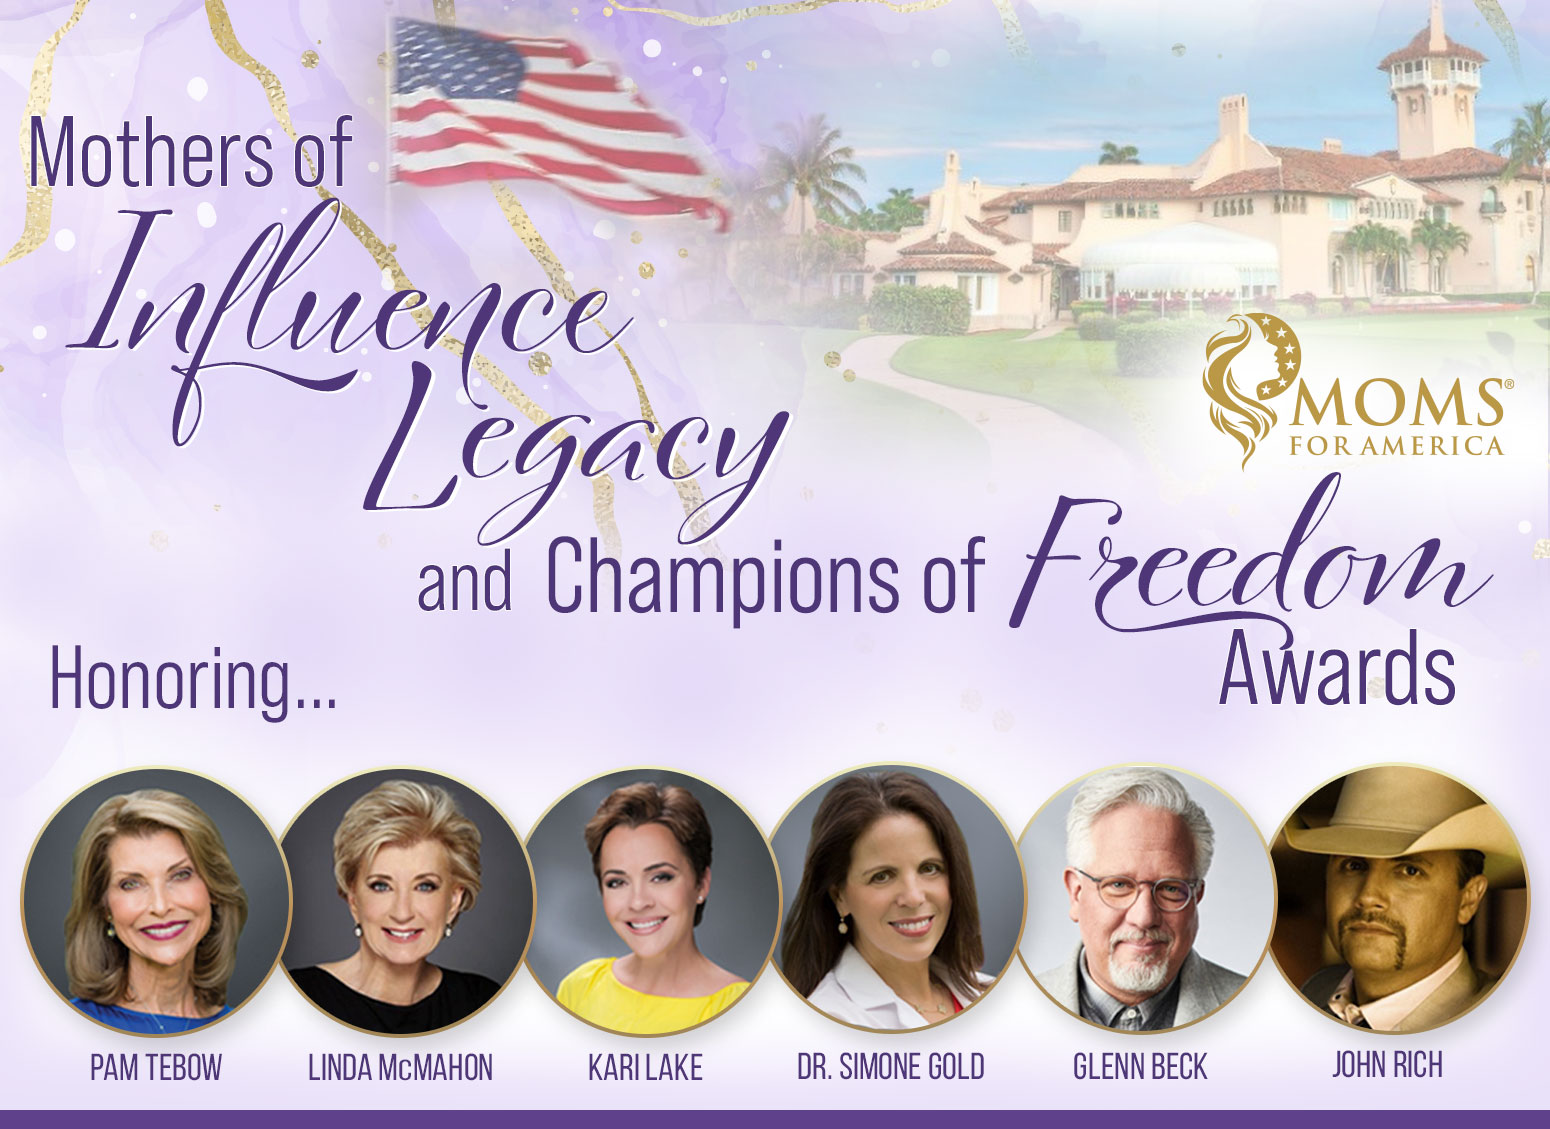 2022 Mothers of Influence, Legacy and Champions of Freedom Awards